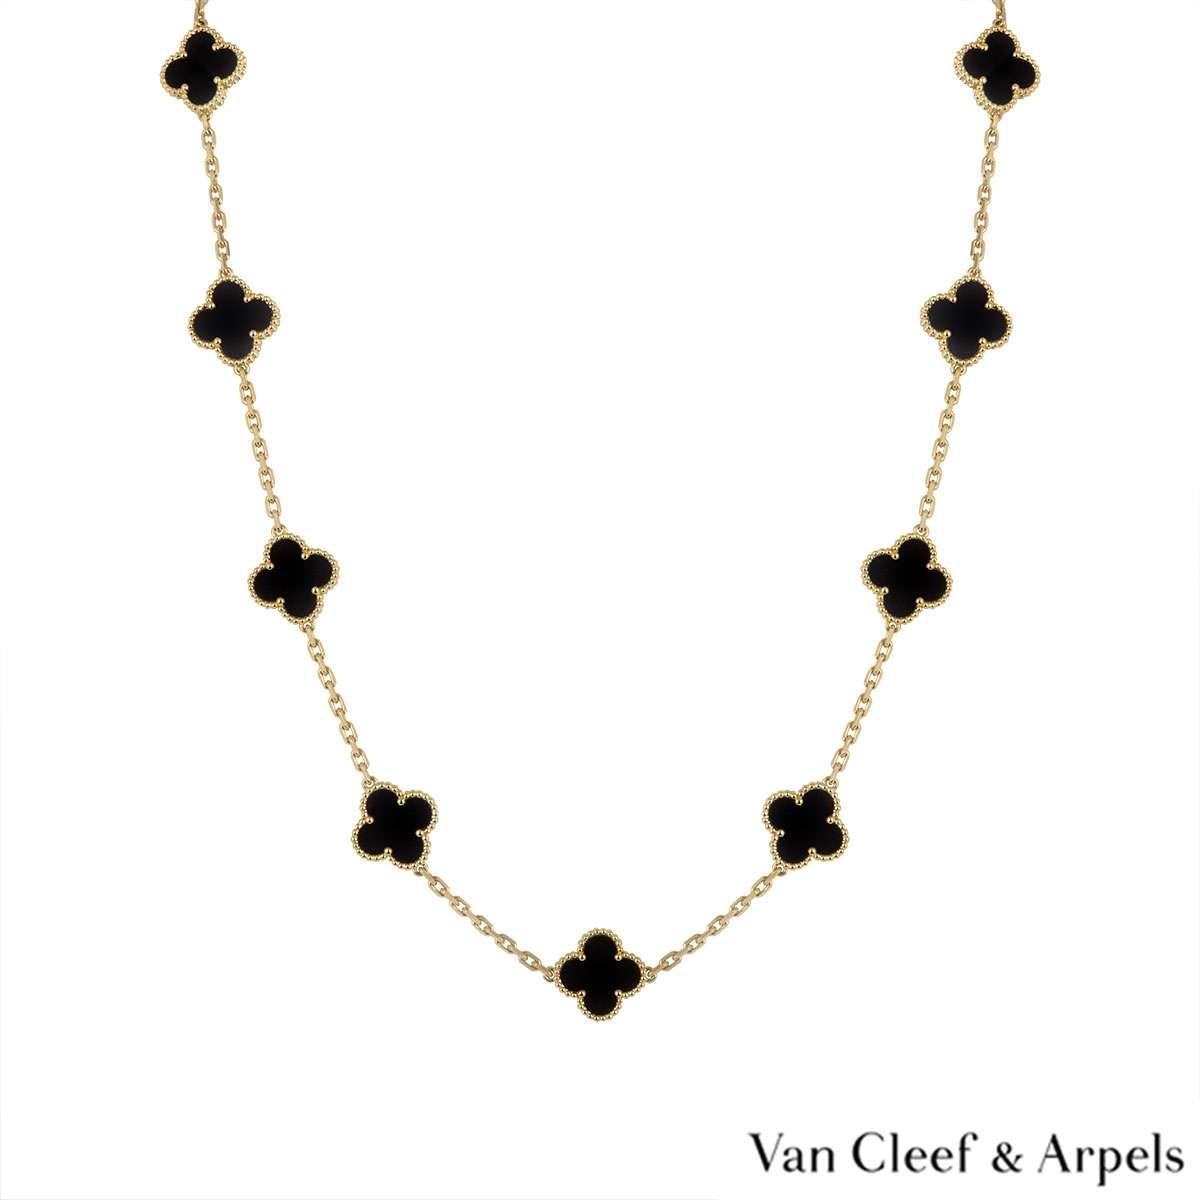 An 18k yellow gold necklace by Van Cleef & Arpels from the Vintage Alhambra collection. The necklace features 20 iconic 4 leaf clover motifs, each set with a beaded edge and an onyx inlay, set throughout the length of the chain. The trace link